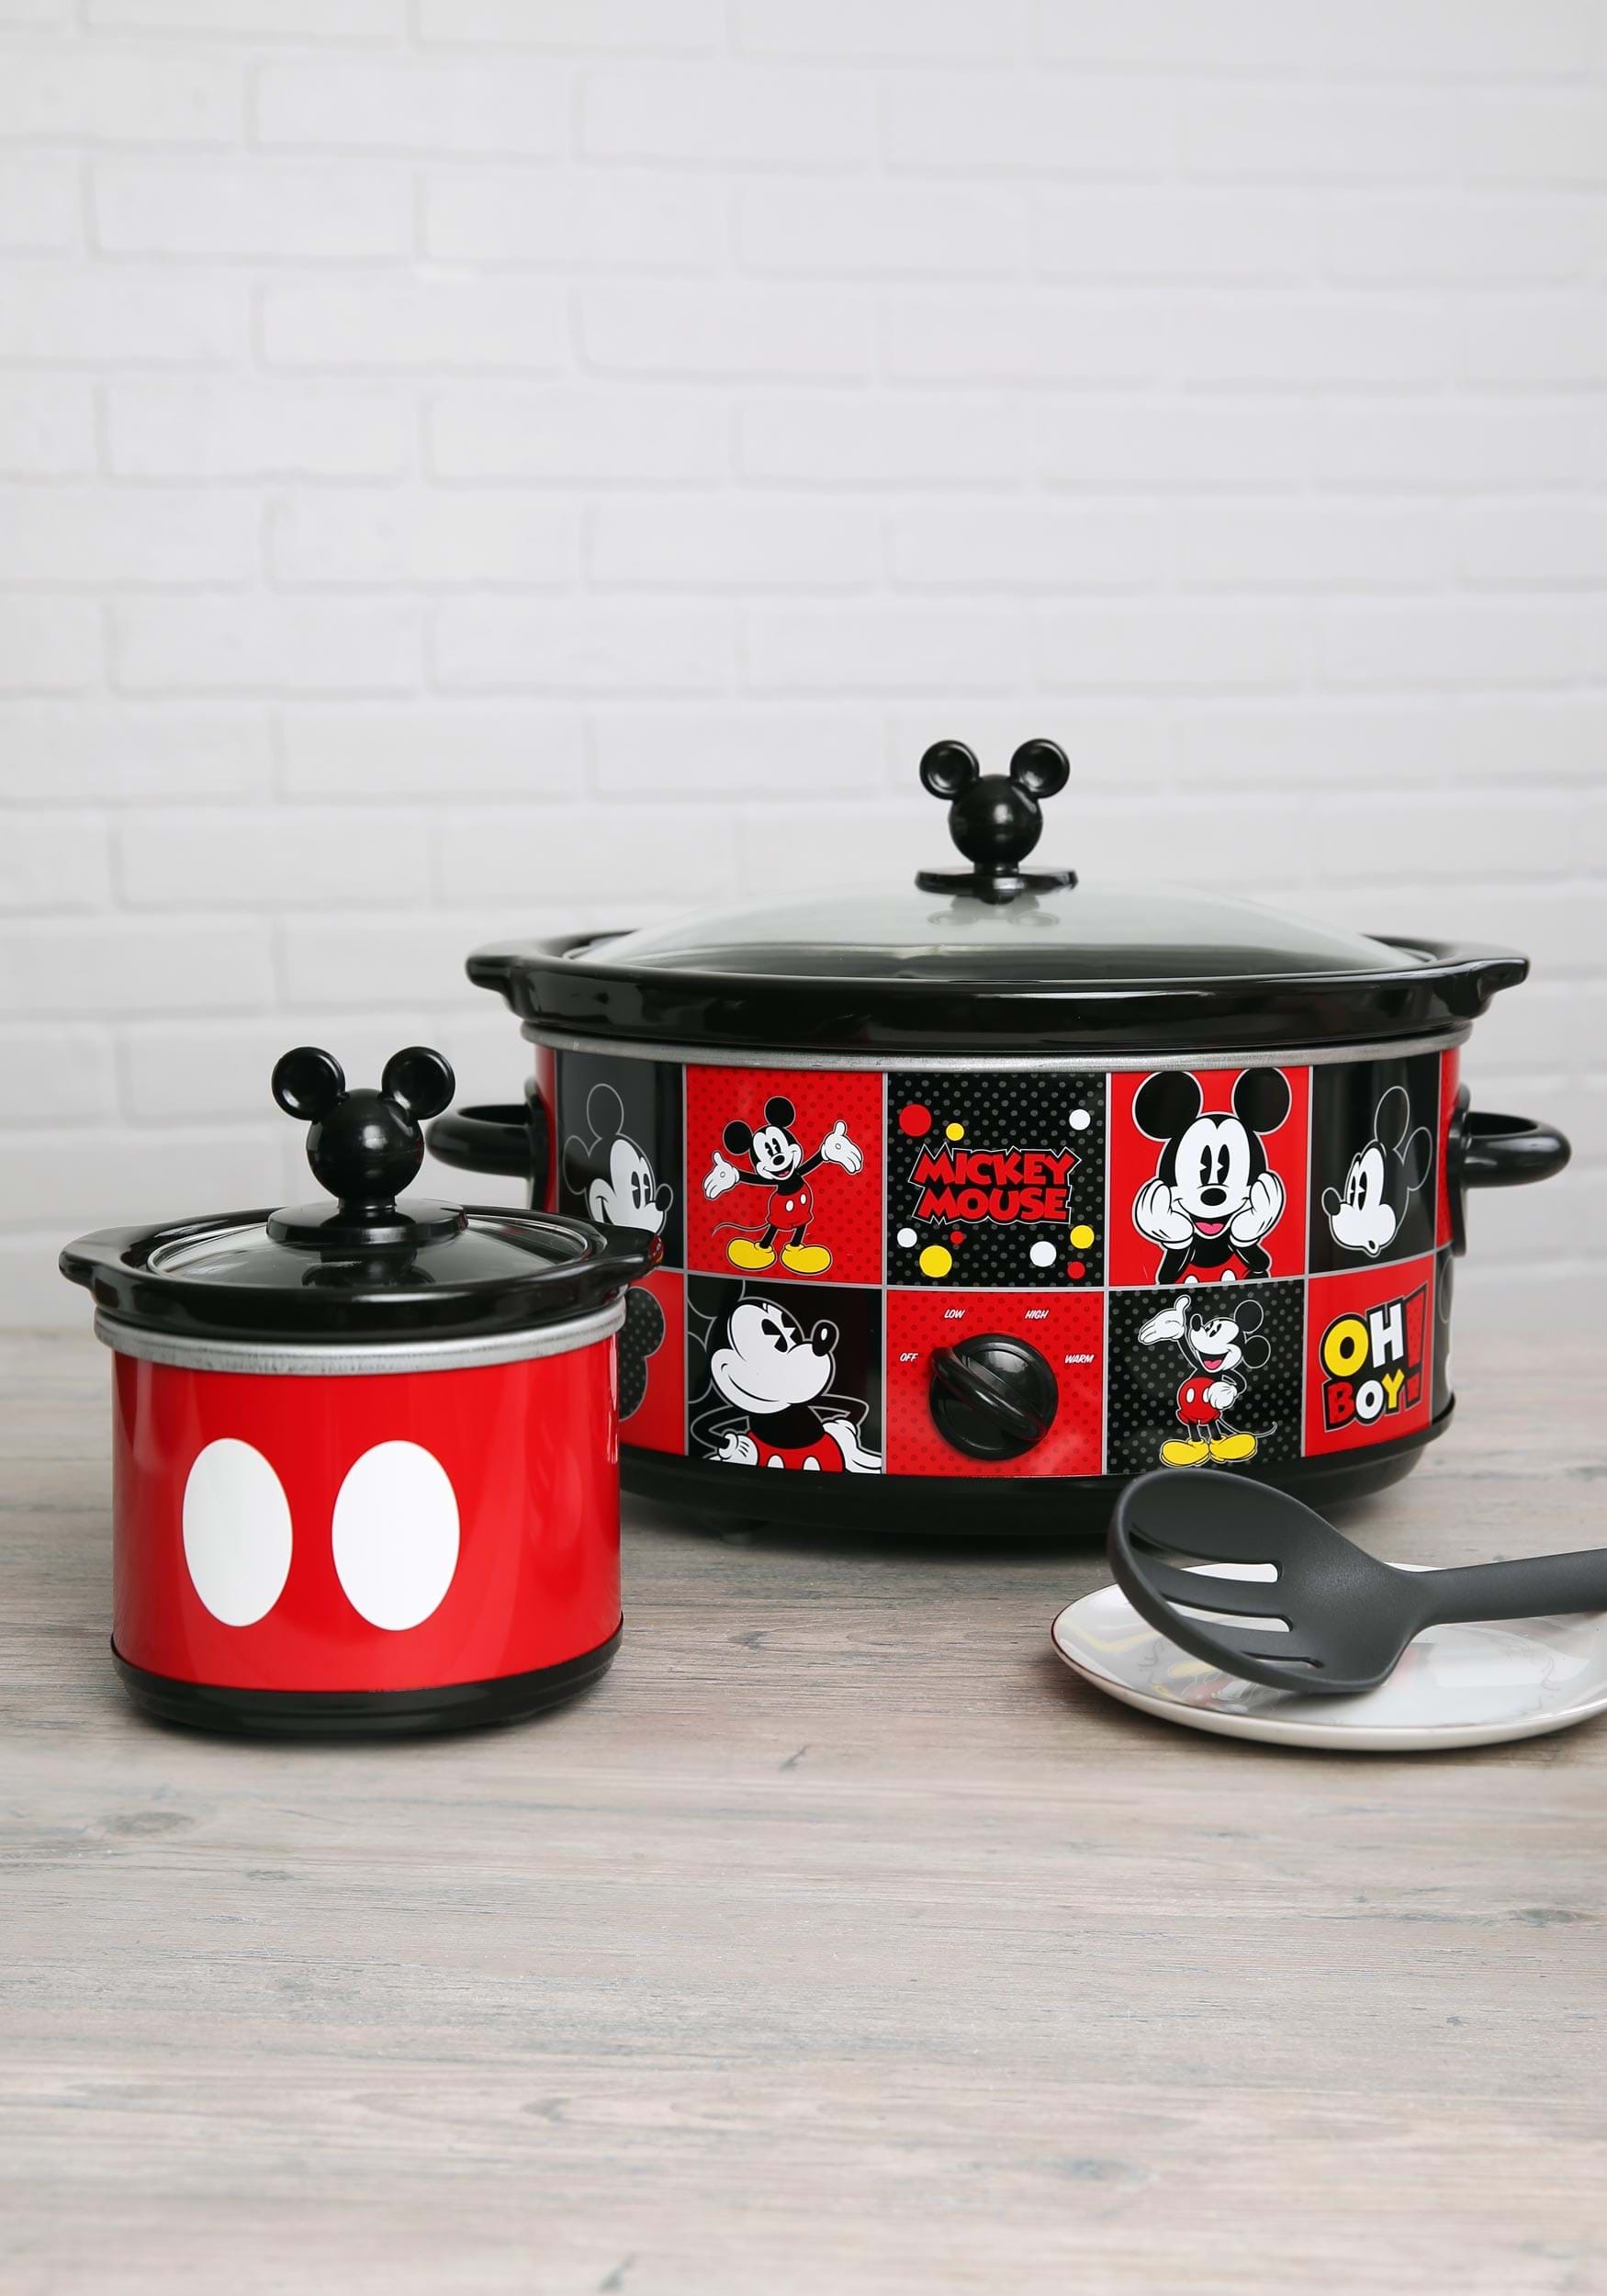 https://images.fun.com/products/49759/1-1/mickey-mouse-5-qt-slow-cooker-w-dipper1-update.jpg